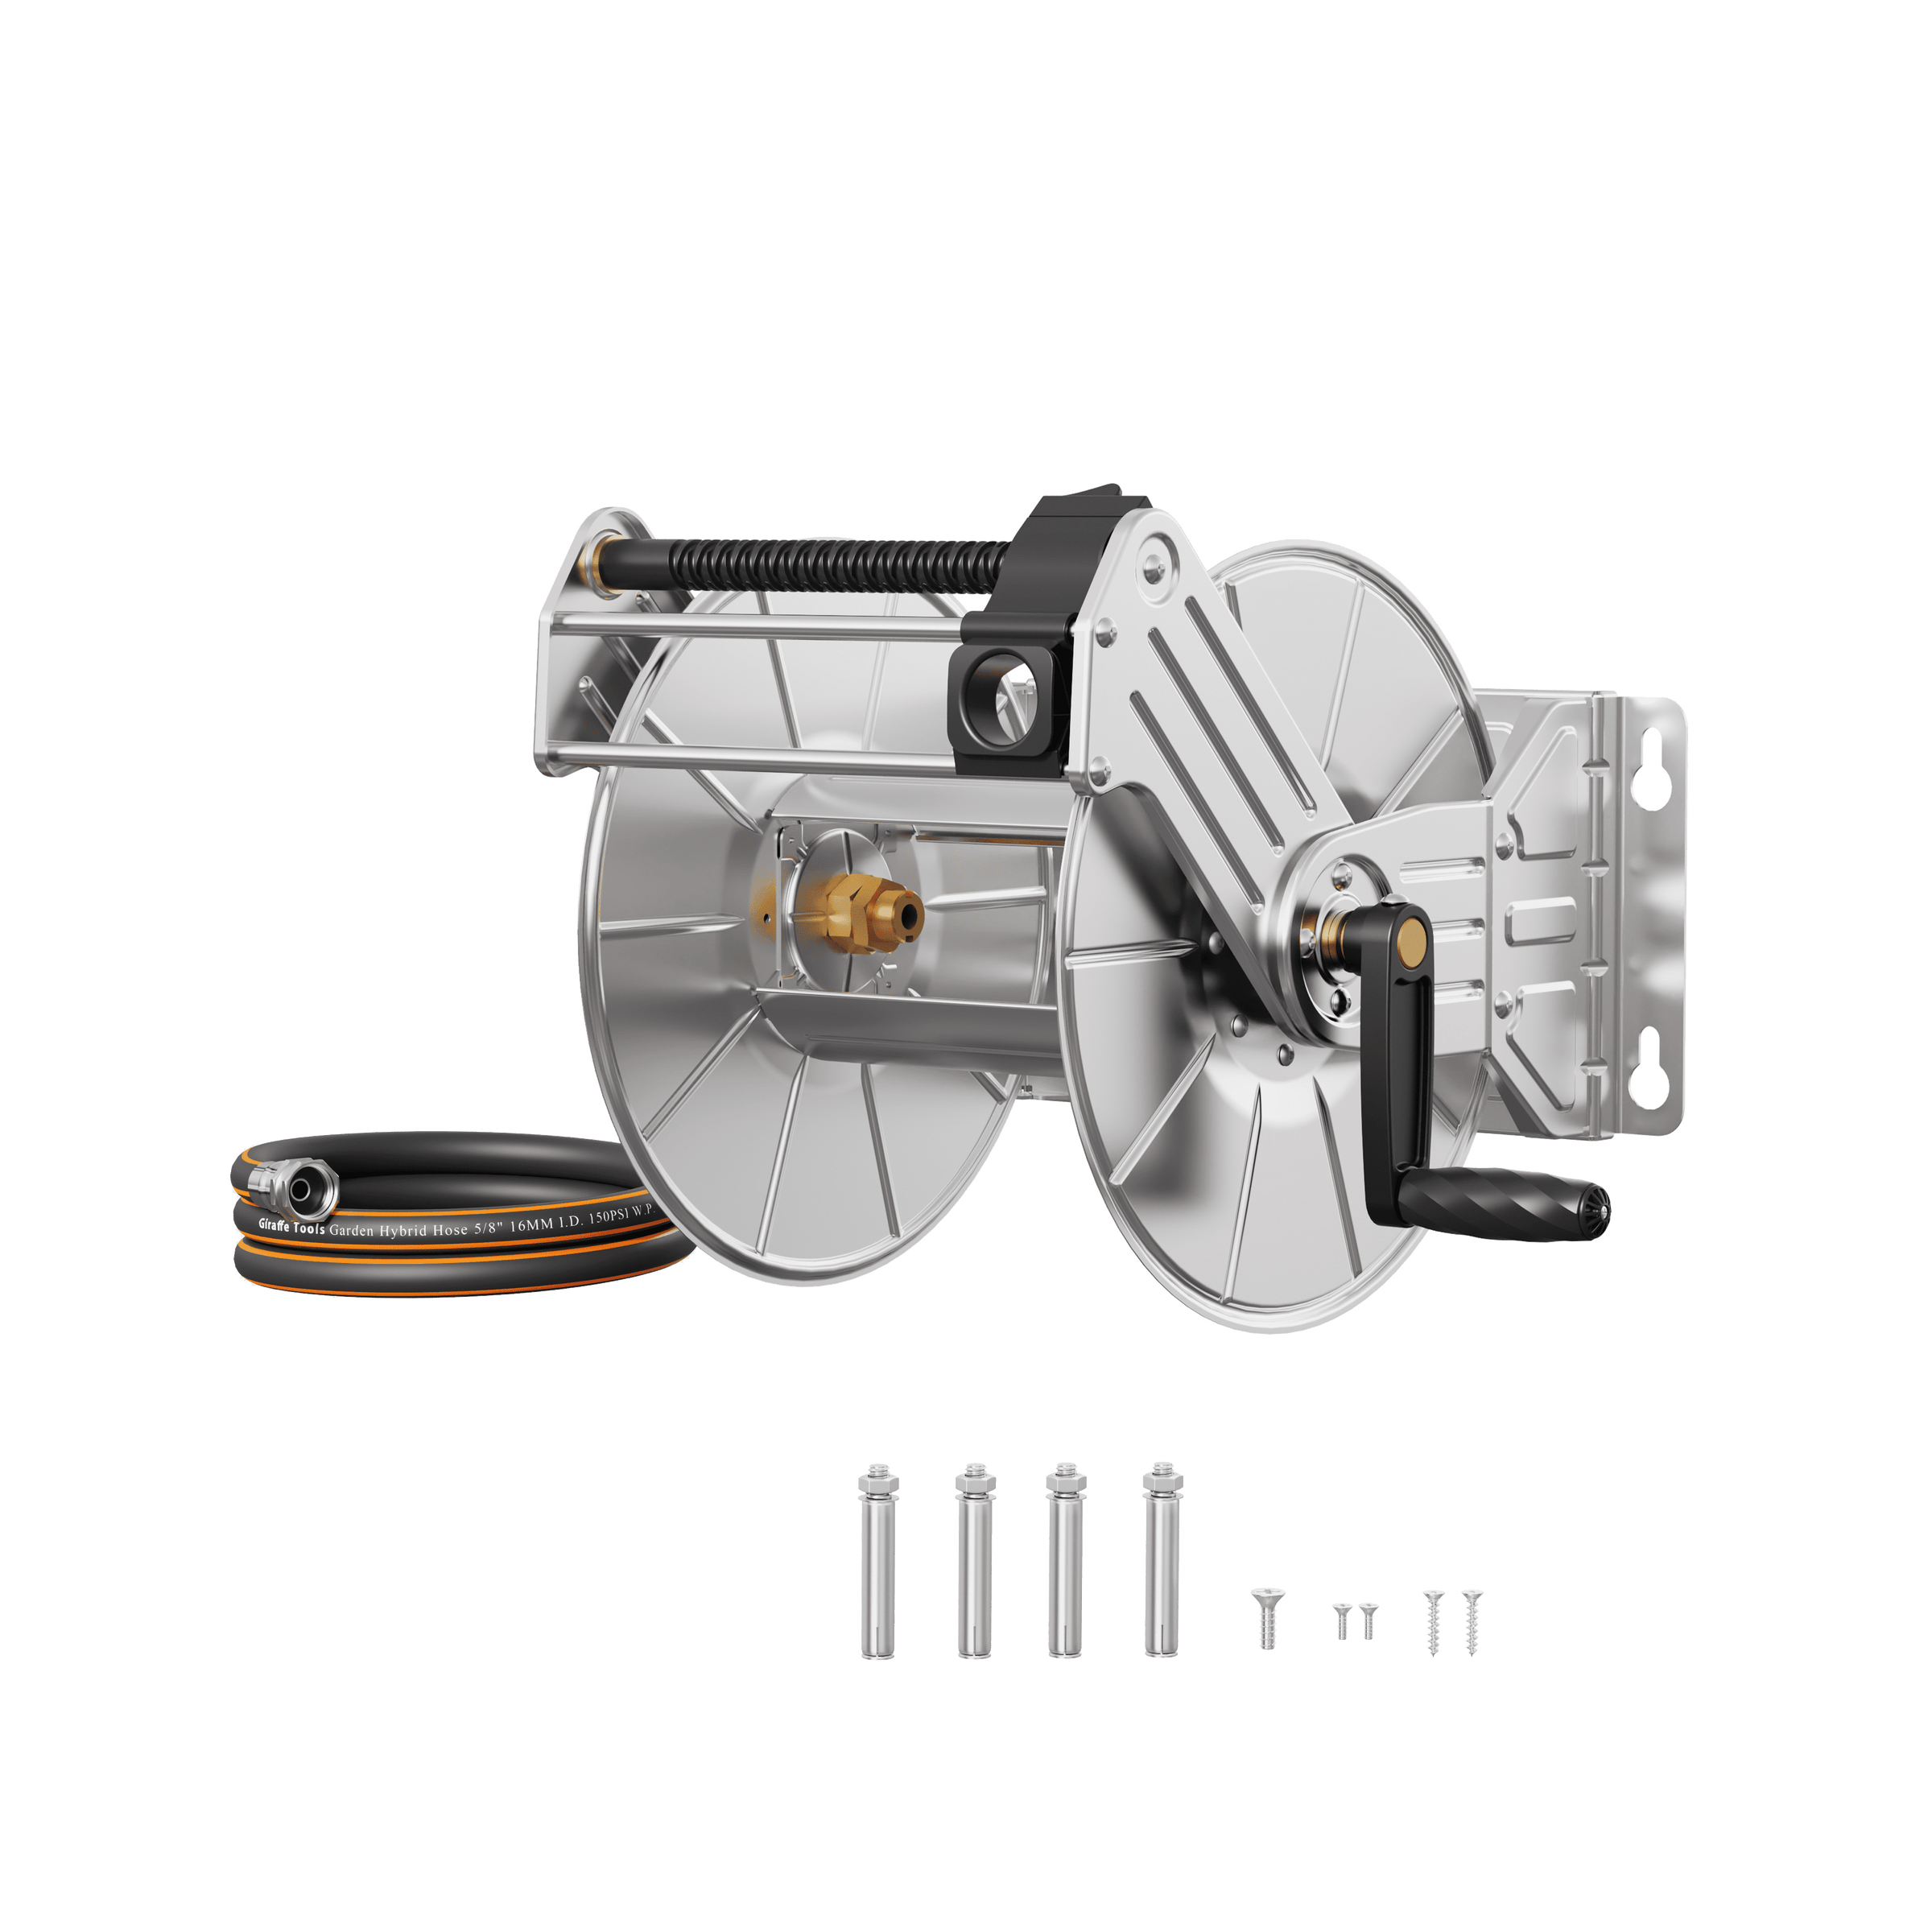 Wall-Mount Hose Reel with 6Ft. Lead-In Hose - Holds 5/8In. X 150Ft. Hose